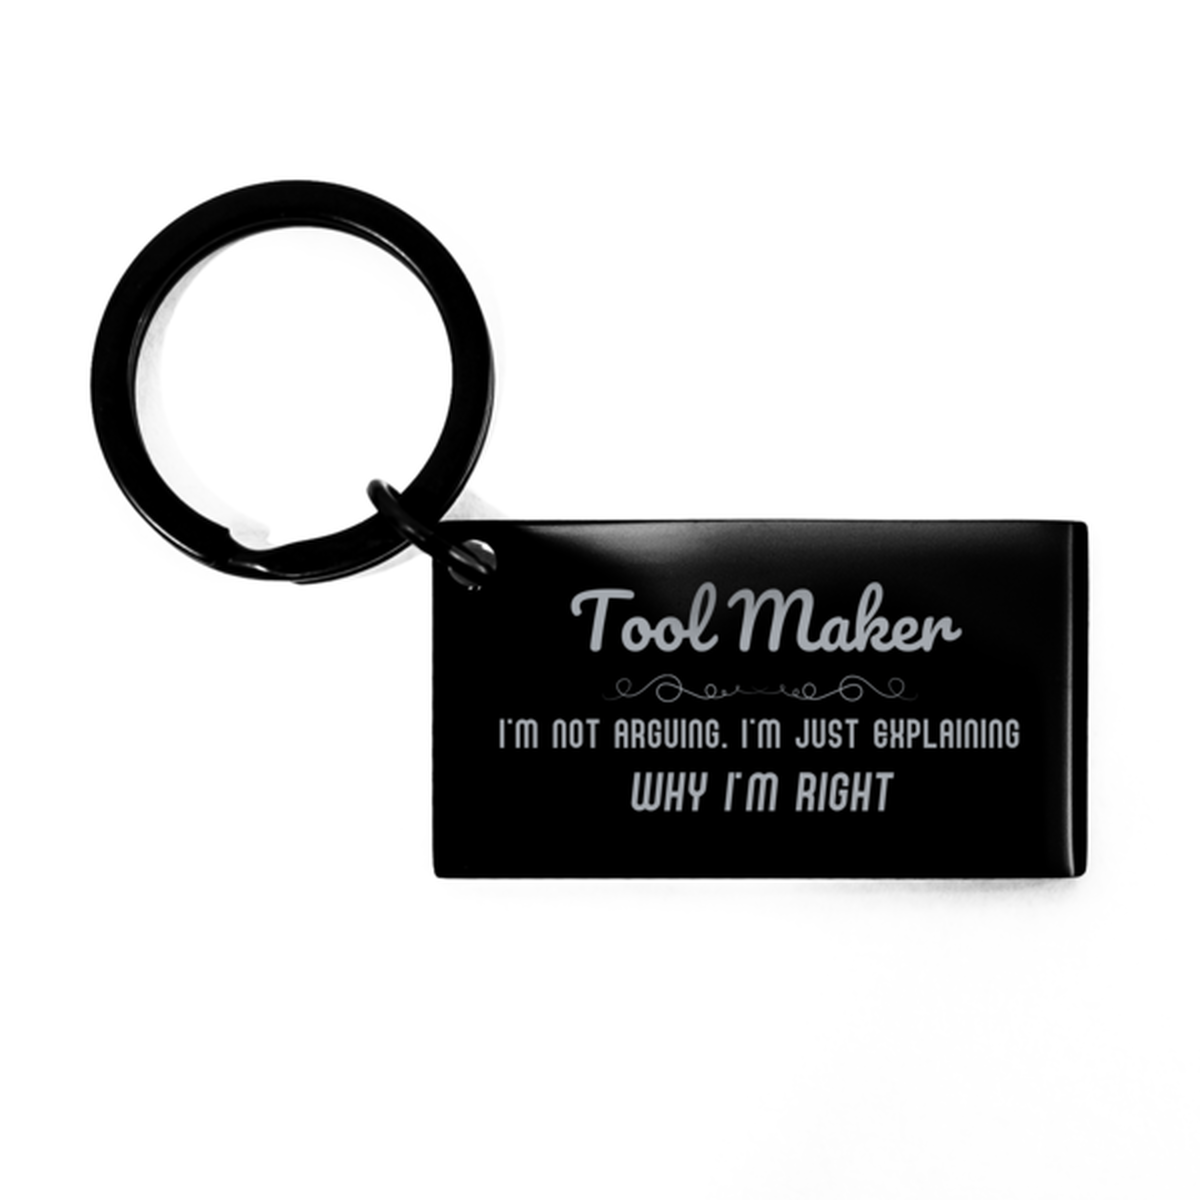 Tool Maker I'm not Arguing. I'm Just Explaining Why I'm RIGHT Keychain, Funny Saying Quote Tool Maker Gifts For Tool Maker Graduation Birthday Christmas Gifts for Men Women Coworker